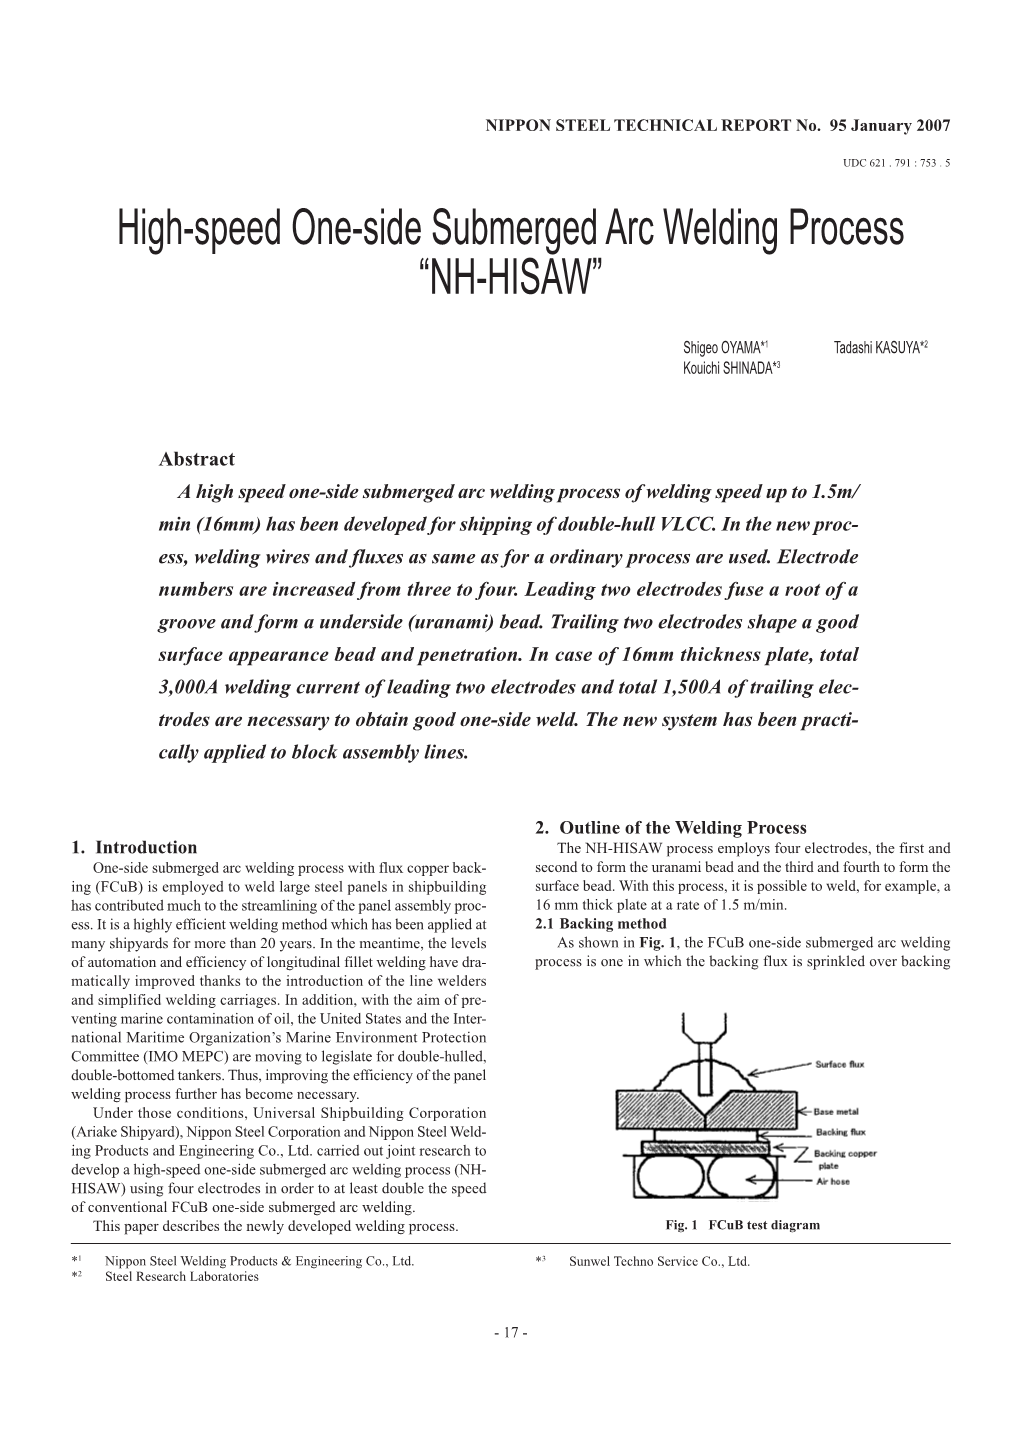 High-Speed One-Side Submerged Arc Welding Process “NH-HISAW”